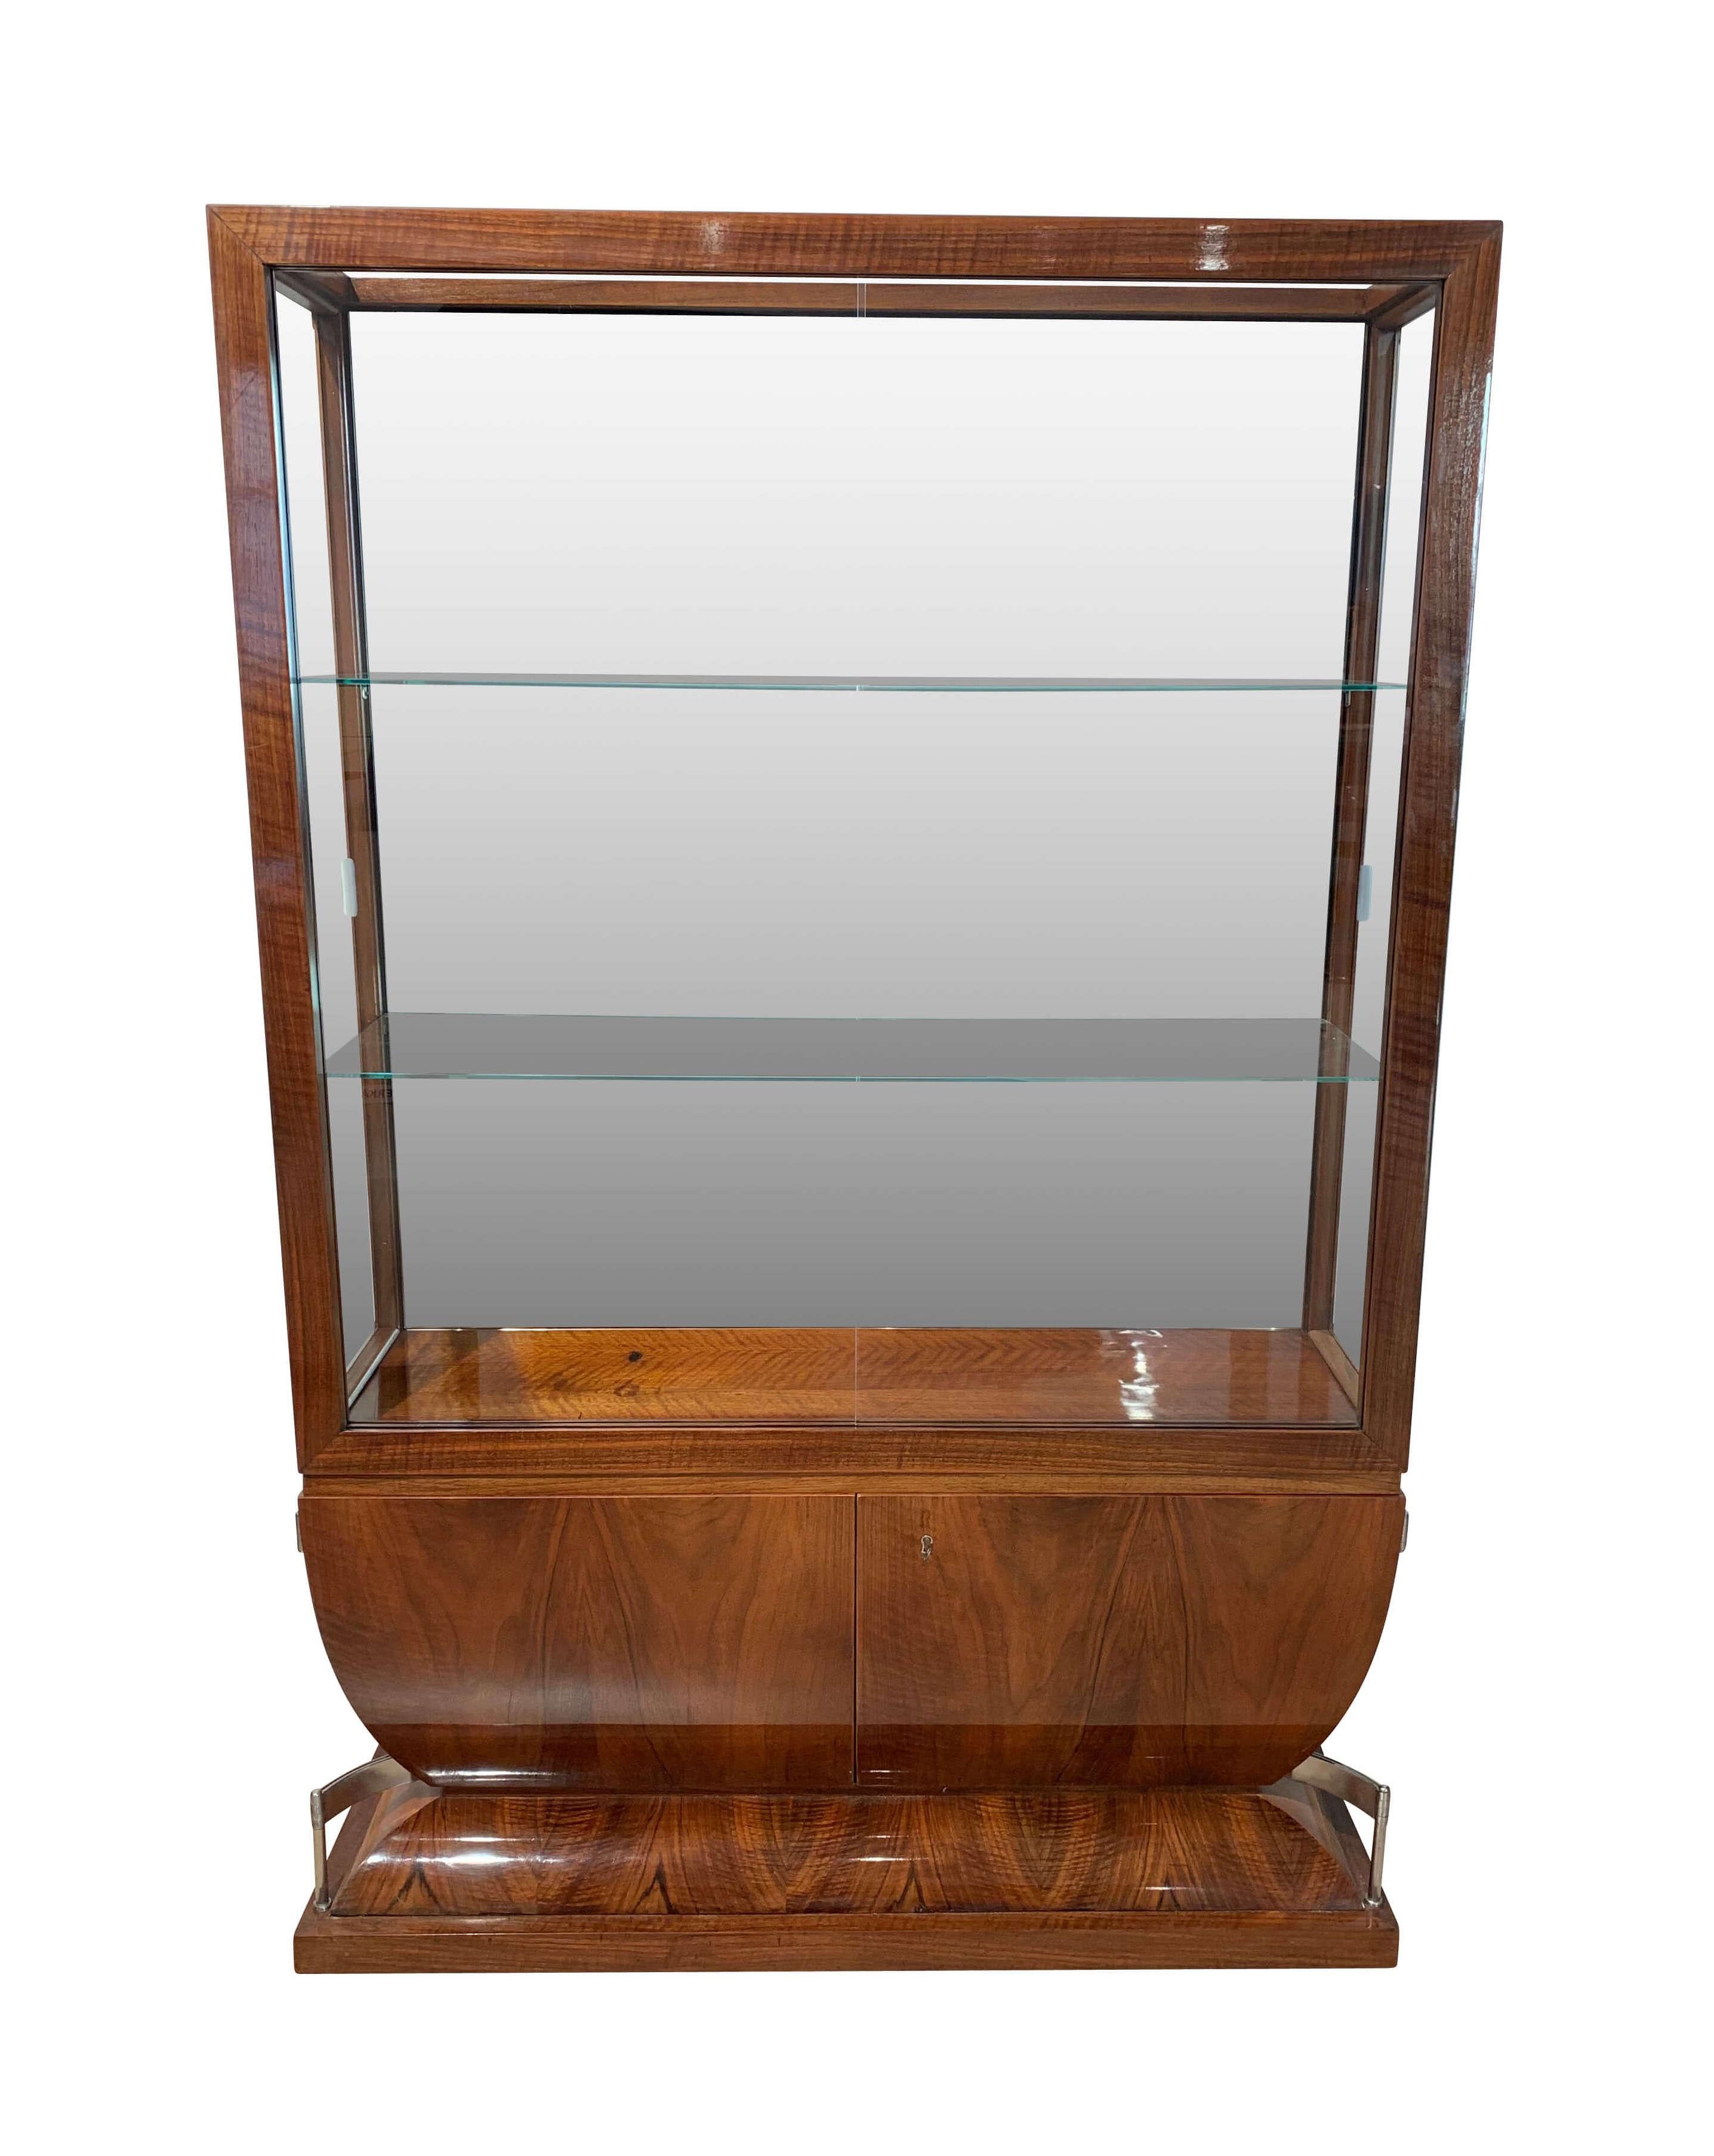 Three-sides glassed Art Deco Vitrine / showcase art from France, circa 1930

Wonderful walnut veneer, French polished
Walnut frame with the faceted glass widows
Extraordinary hinges on the curved bottom doors. At the front, there are two glass